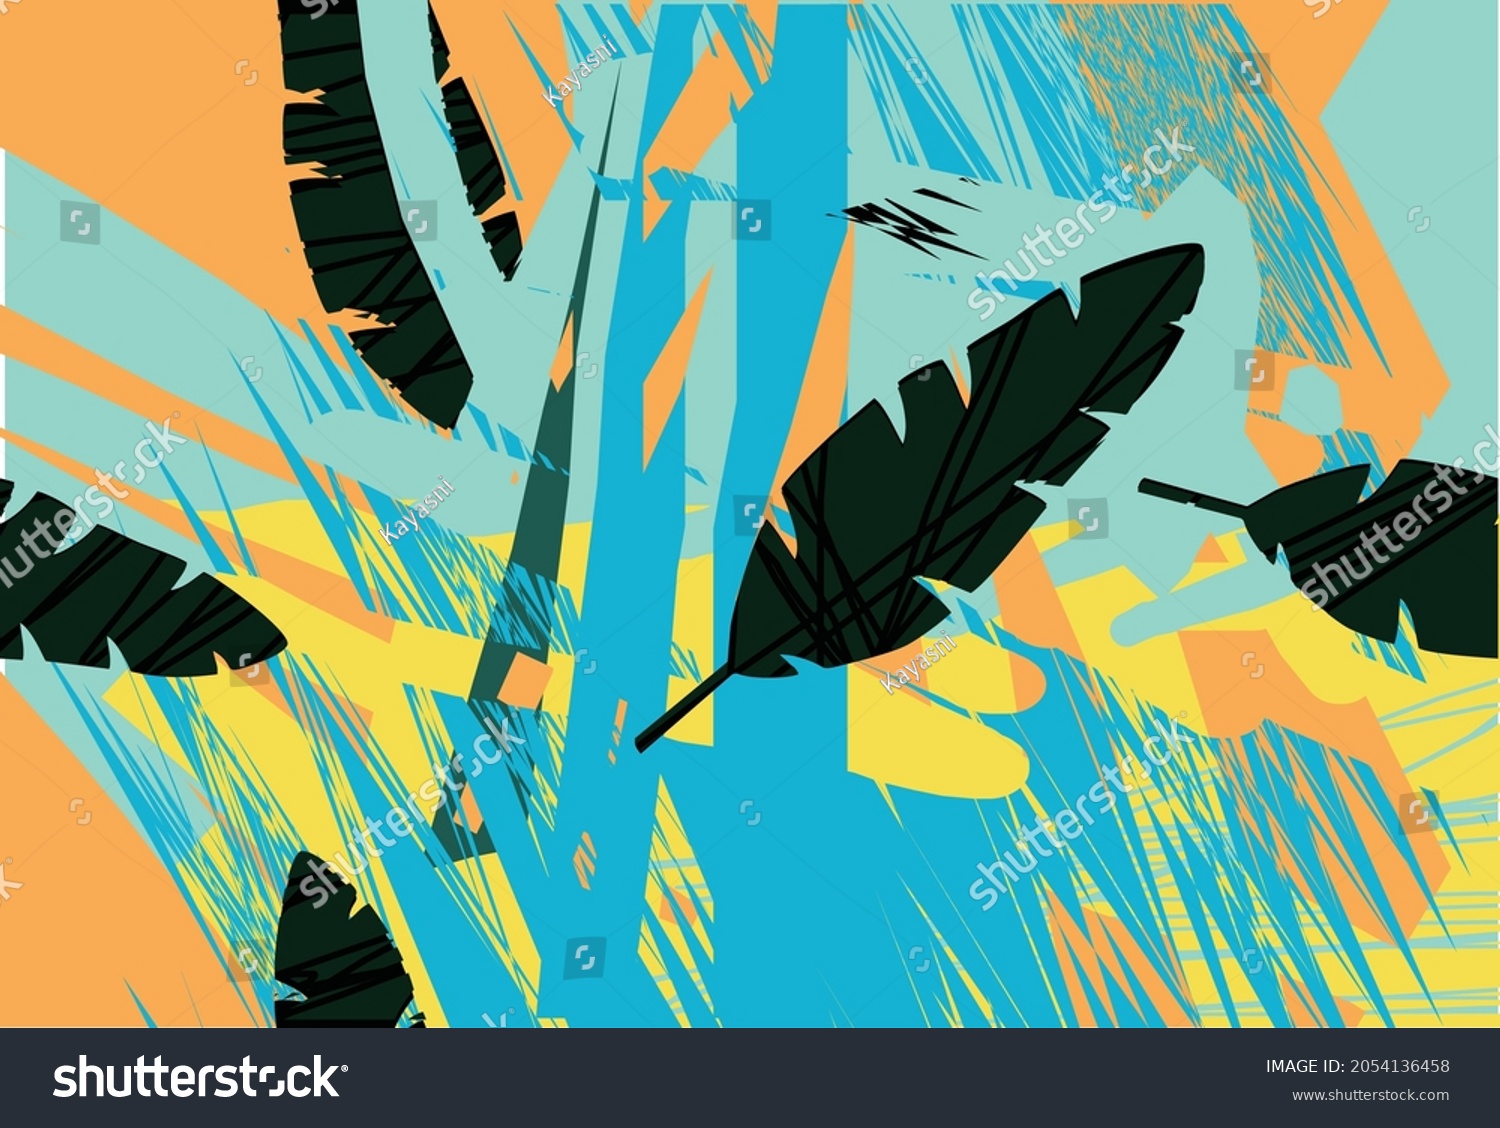 Abstract Floral Painting Wall Art Vector Stock Vector (Royalty Free